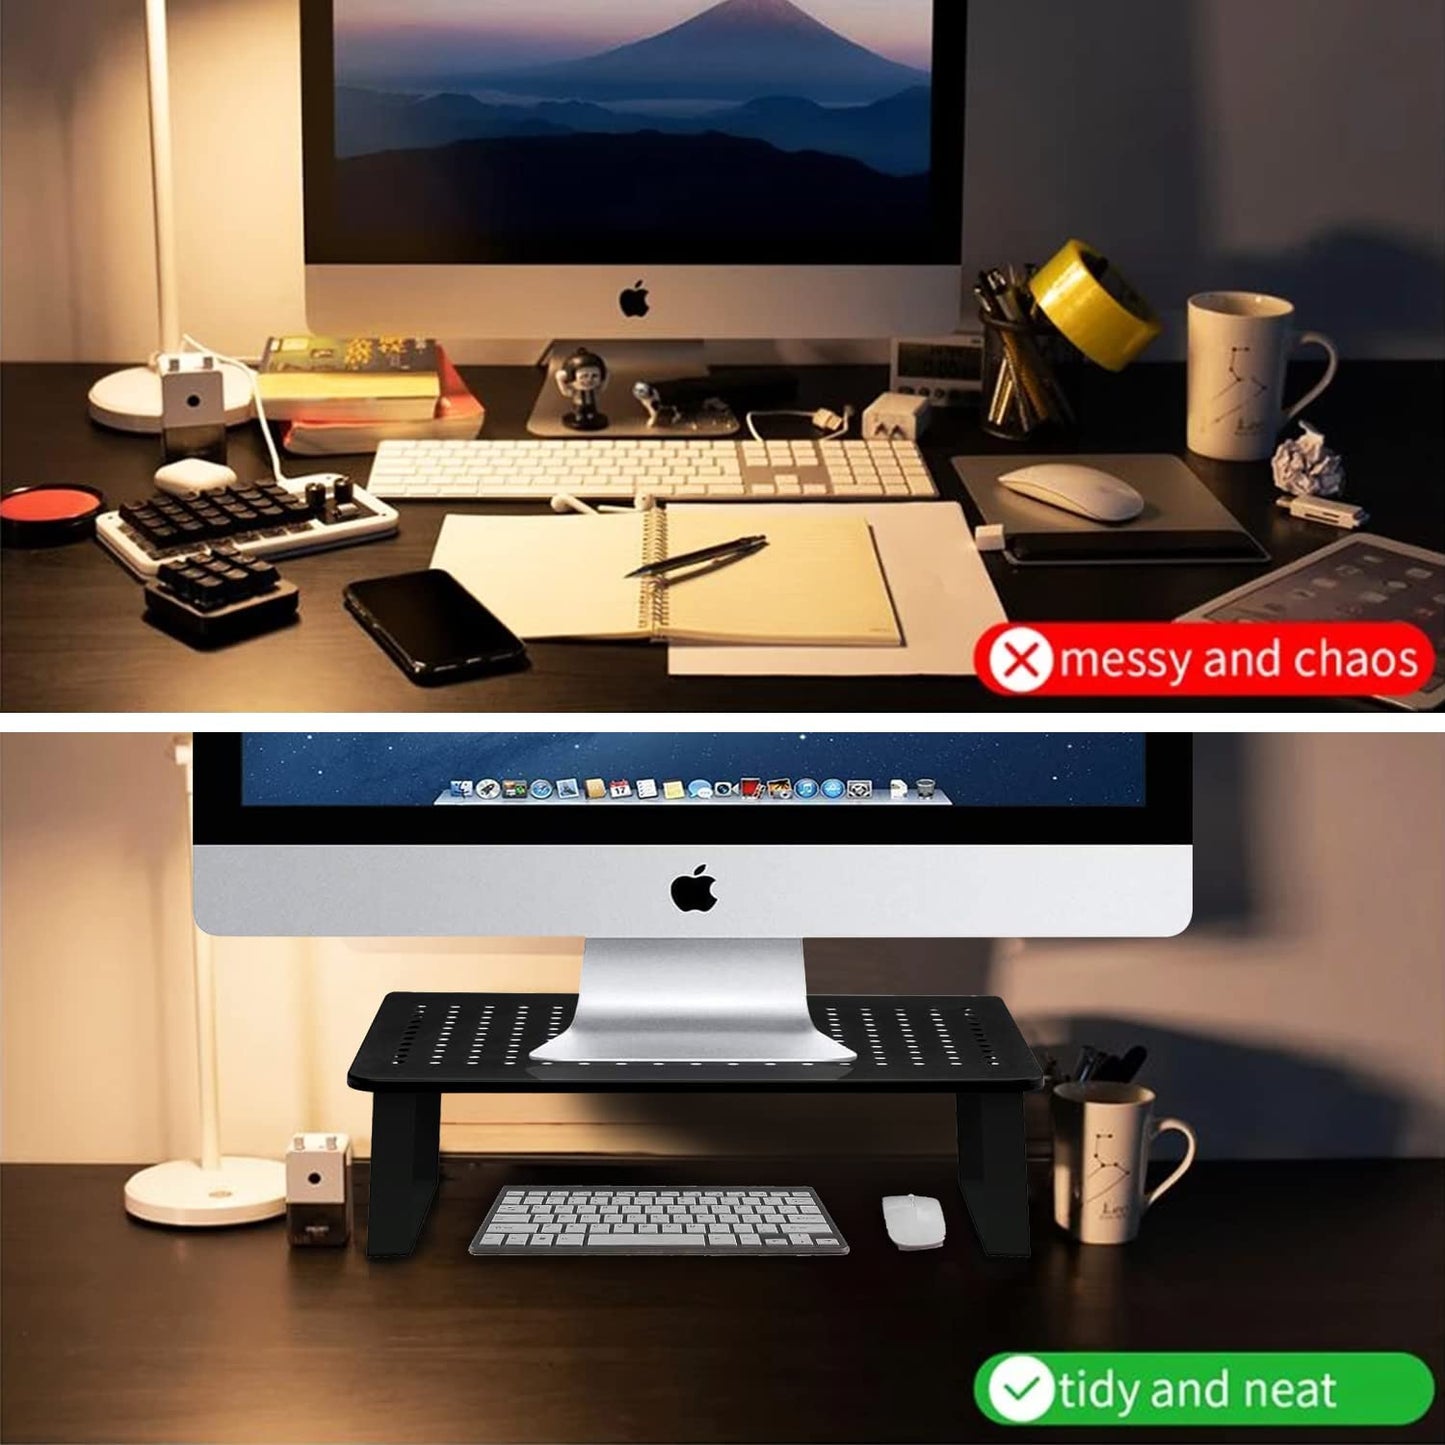 Monitor Stand Riser for Laptop